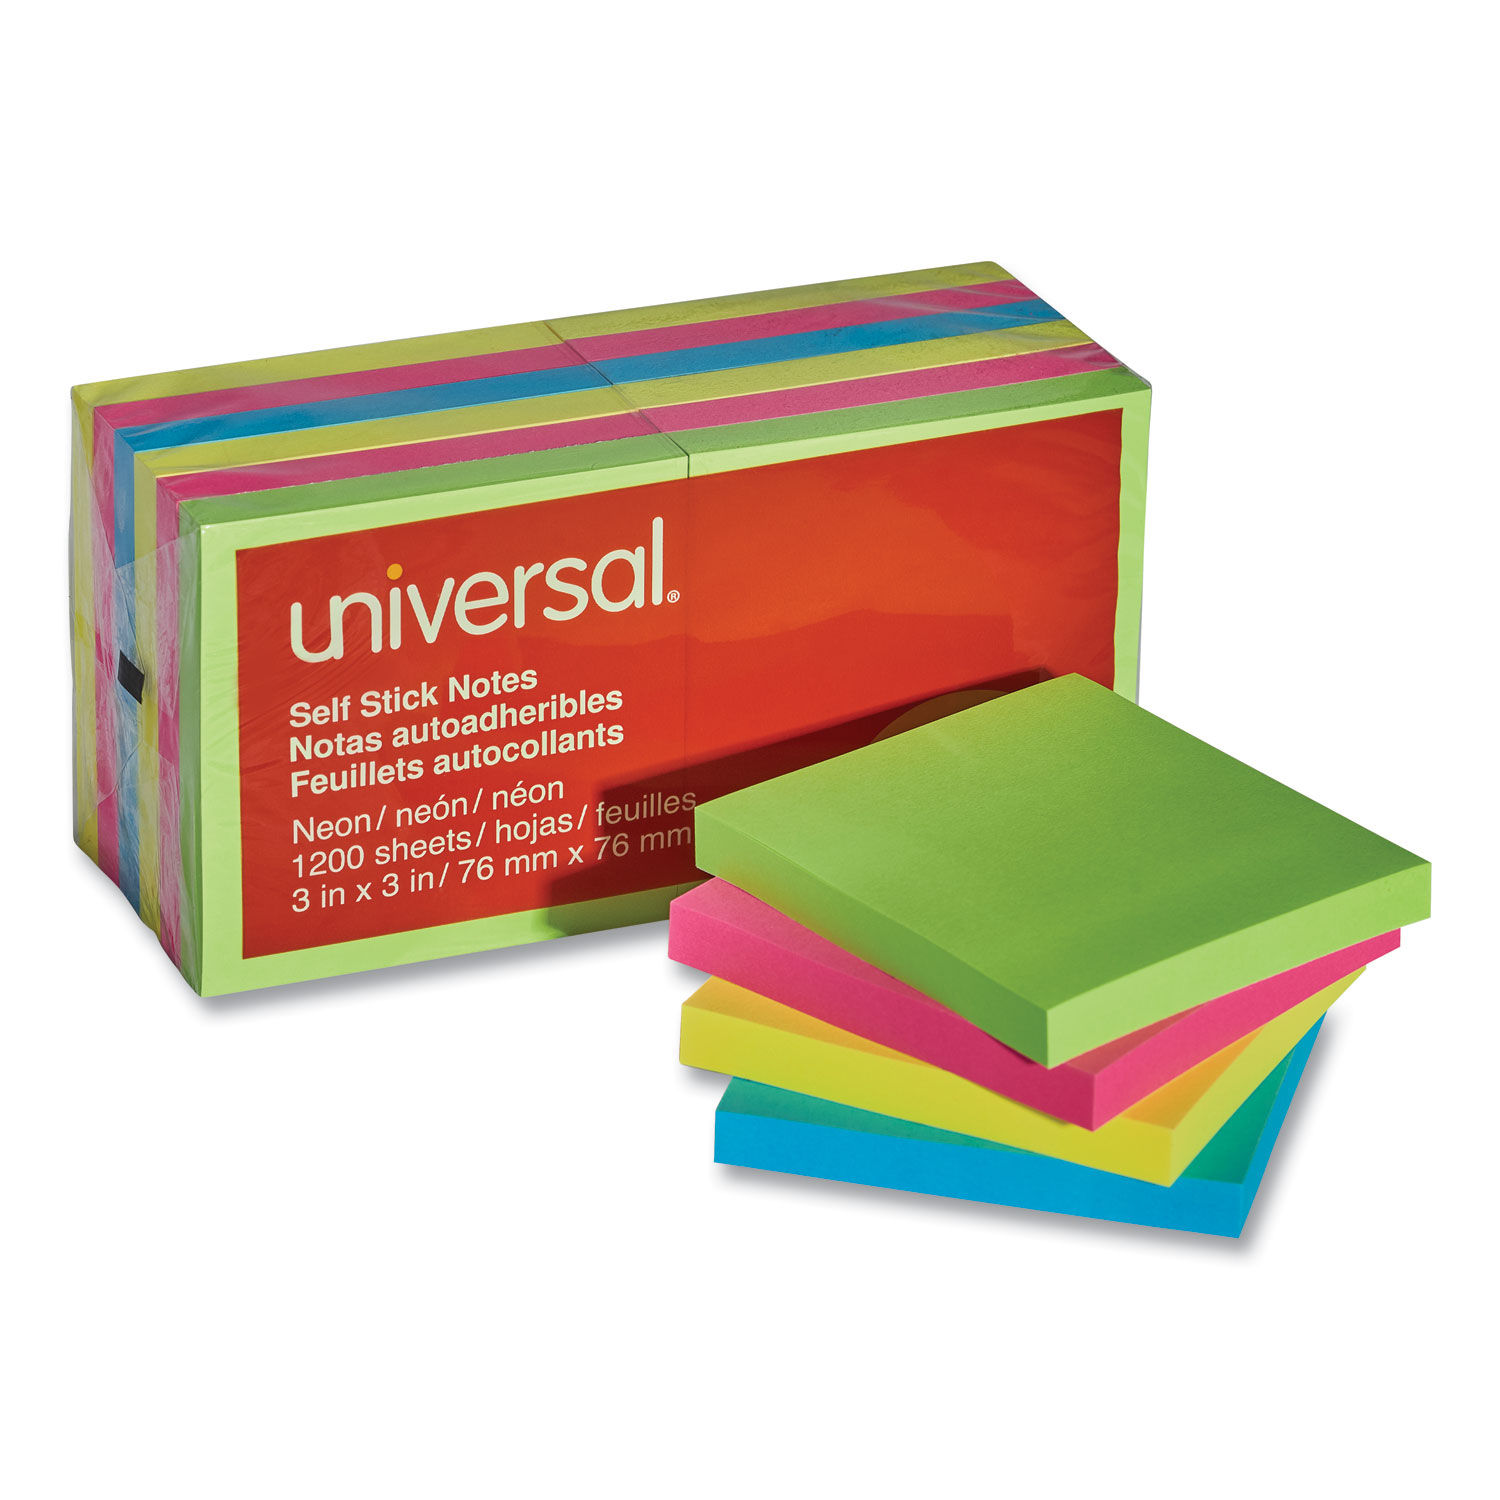 Self-Stick Note Pads by Universal® UNV35612 | OnTimeSupplies.com